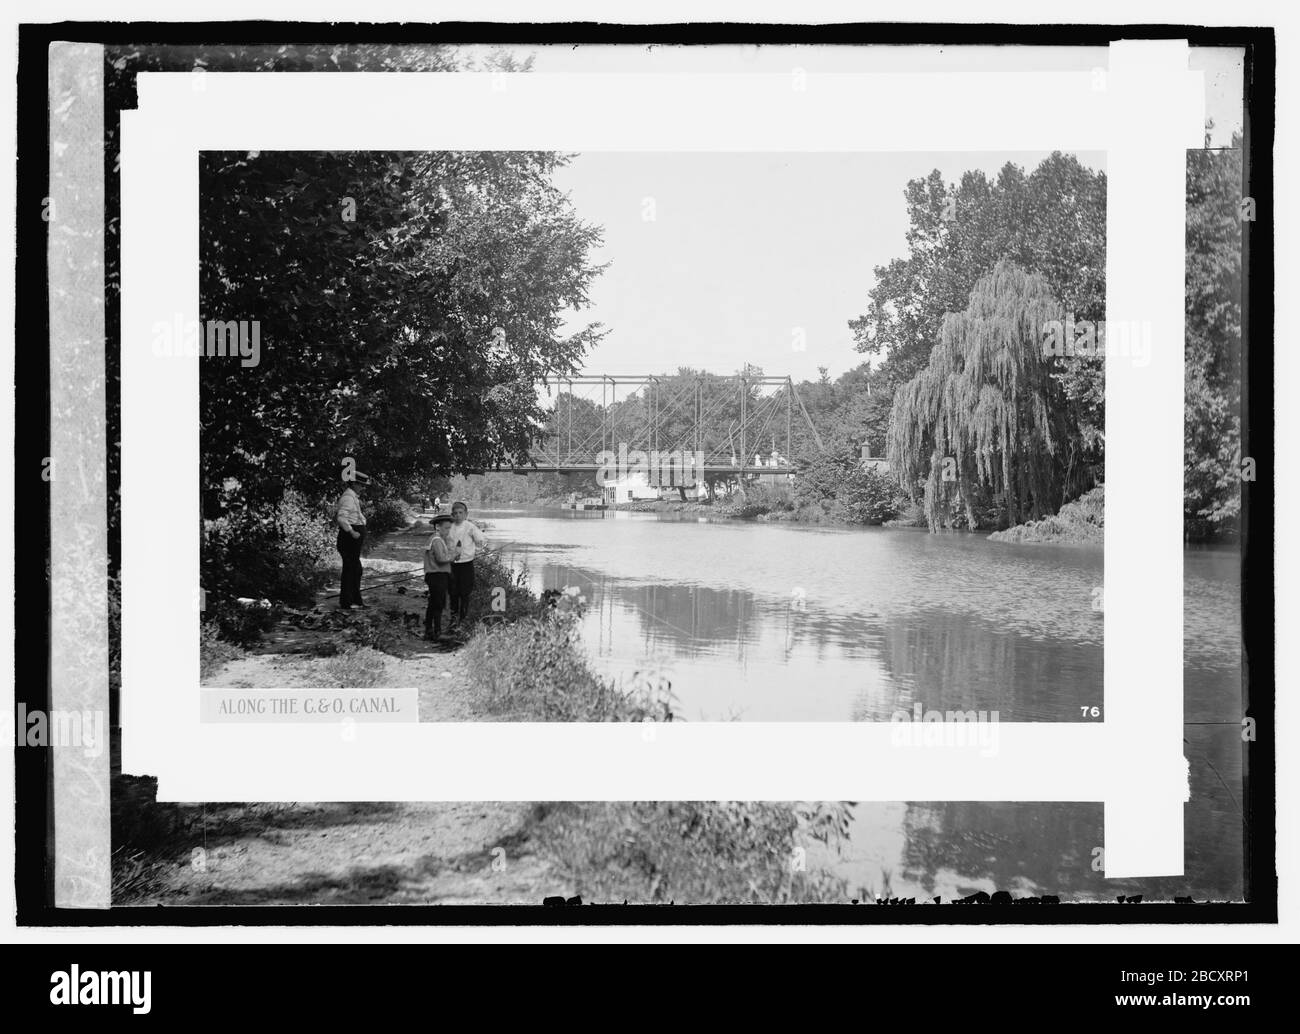 'English: Title: Along the C&O Canal: Chain Bridge Abstract/Medium: 1 negative : glass; 5 x 7 in. Or smaller; between 1909 and 1923 date QS:P,+1950-00-00T00:00:00:00Z/7,P1319,+1909-00-00T00:00:00:00:00:00:00:00:00:00:00:00:00:00:00:00:00:00:00:00 / 9,P1326,+1923-00-+1924-00-00-C-C-C-C-C-C- Stockfoto